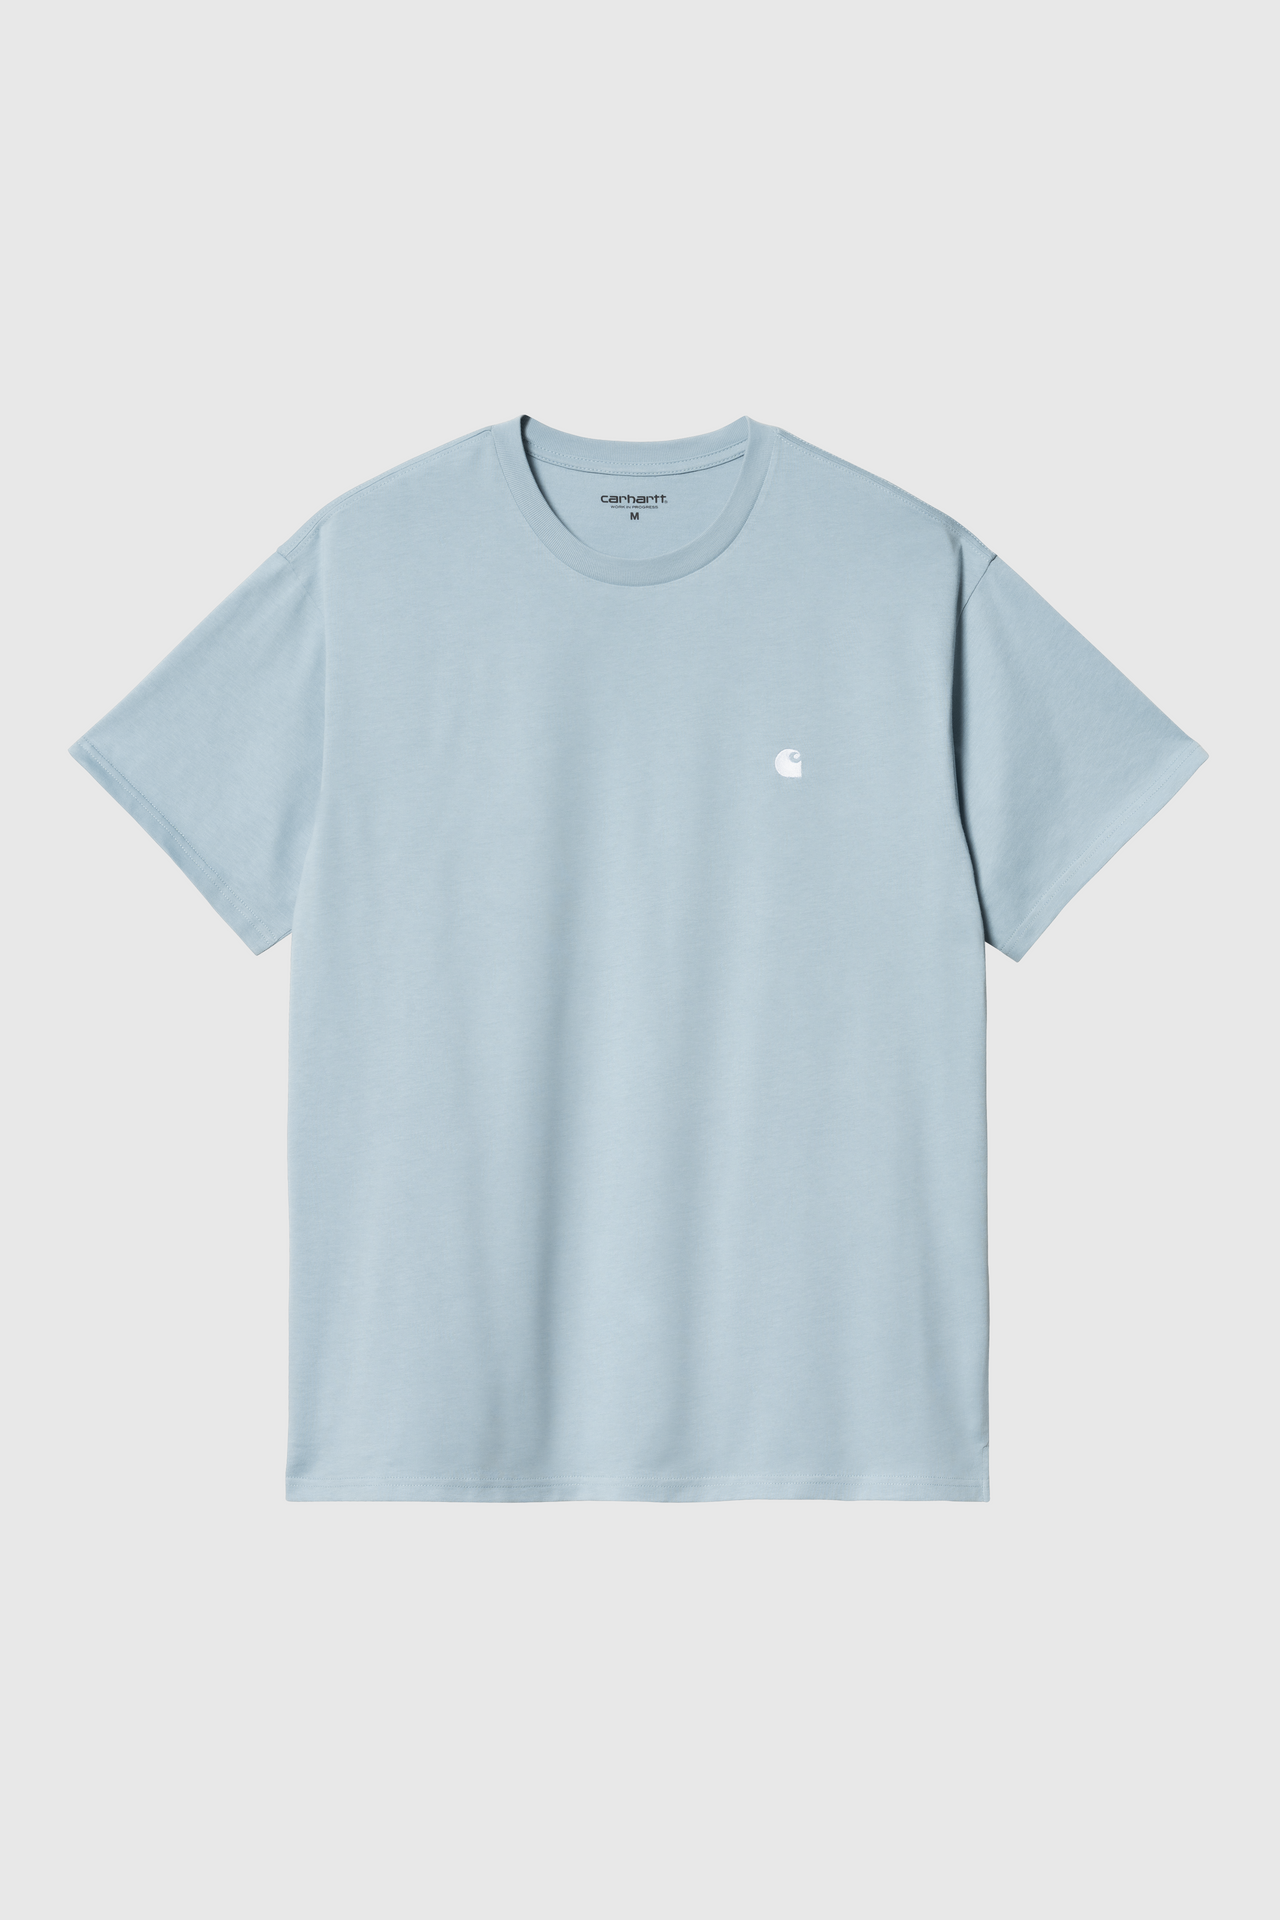 MADISON T-SHIRT FROSTED BLUE